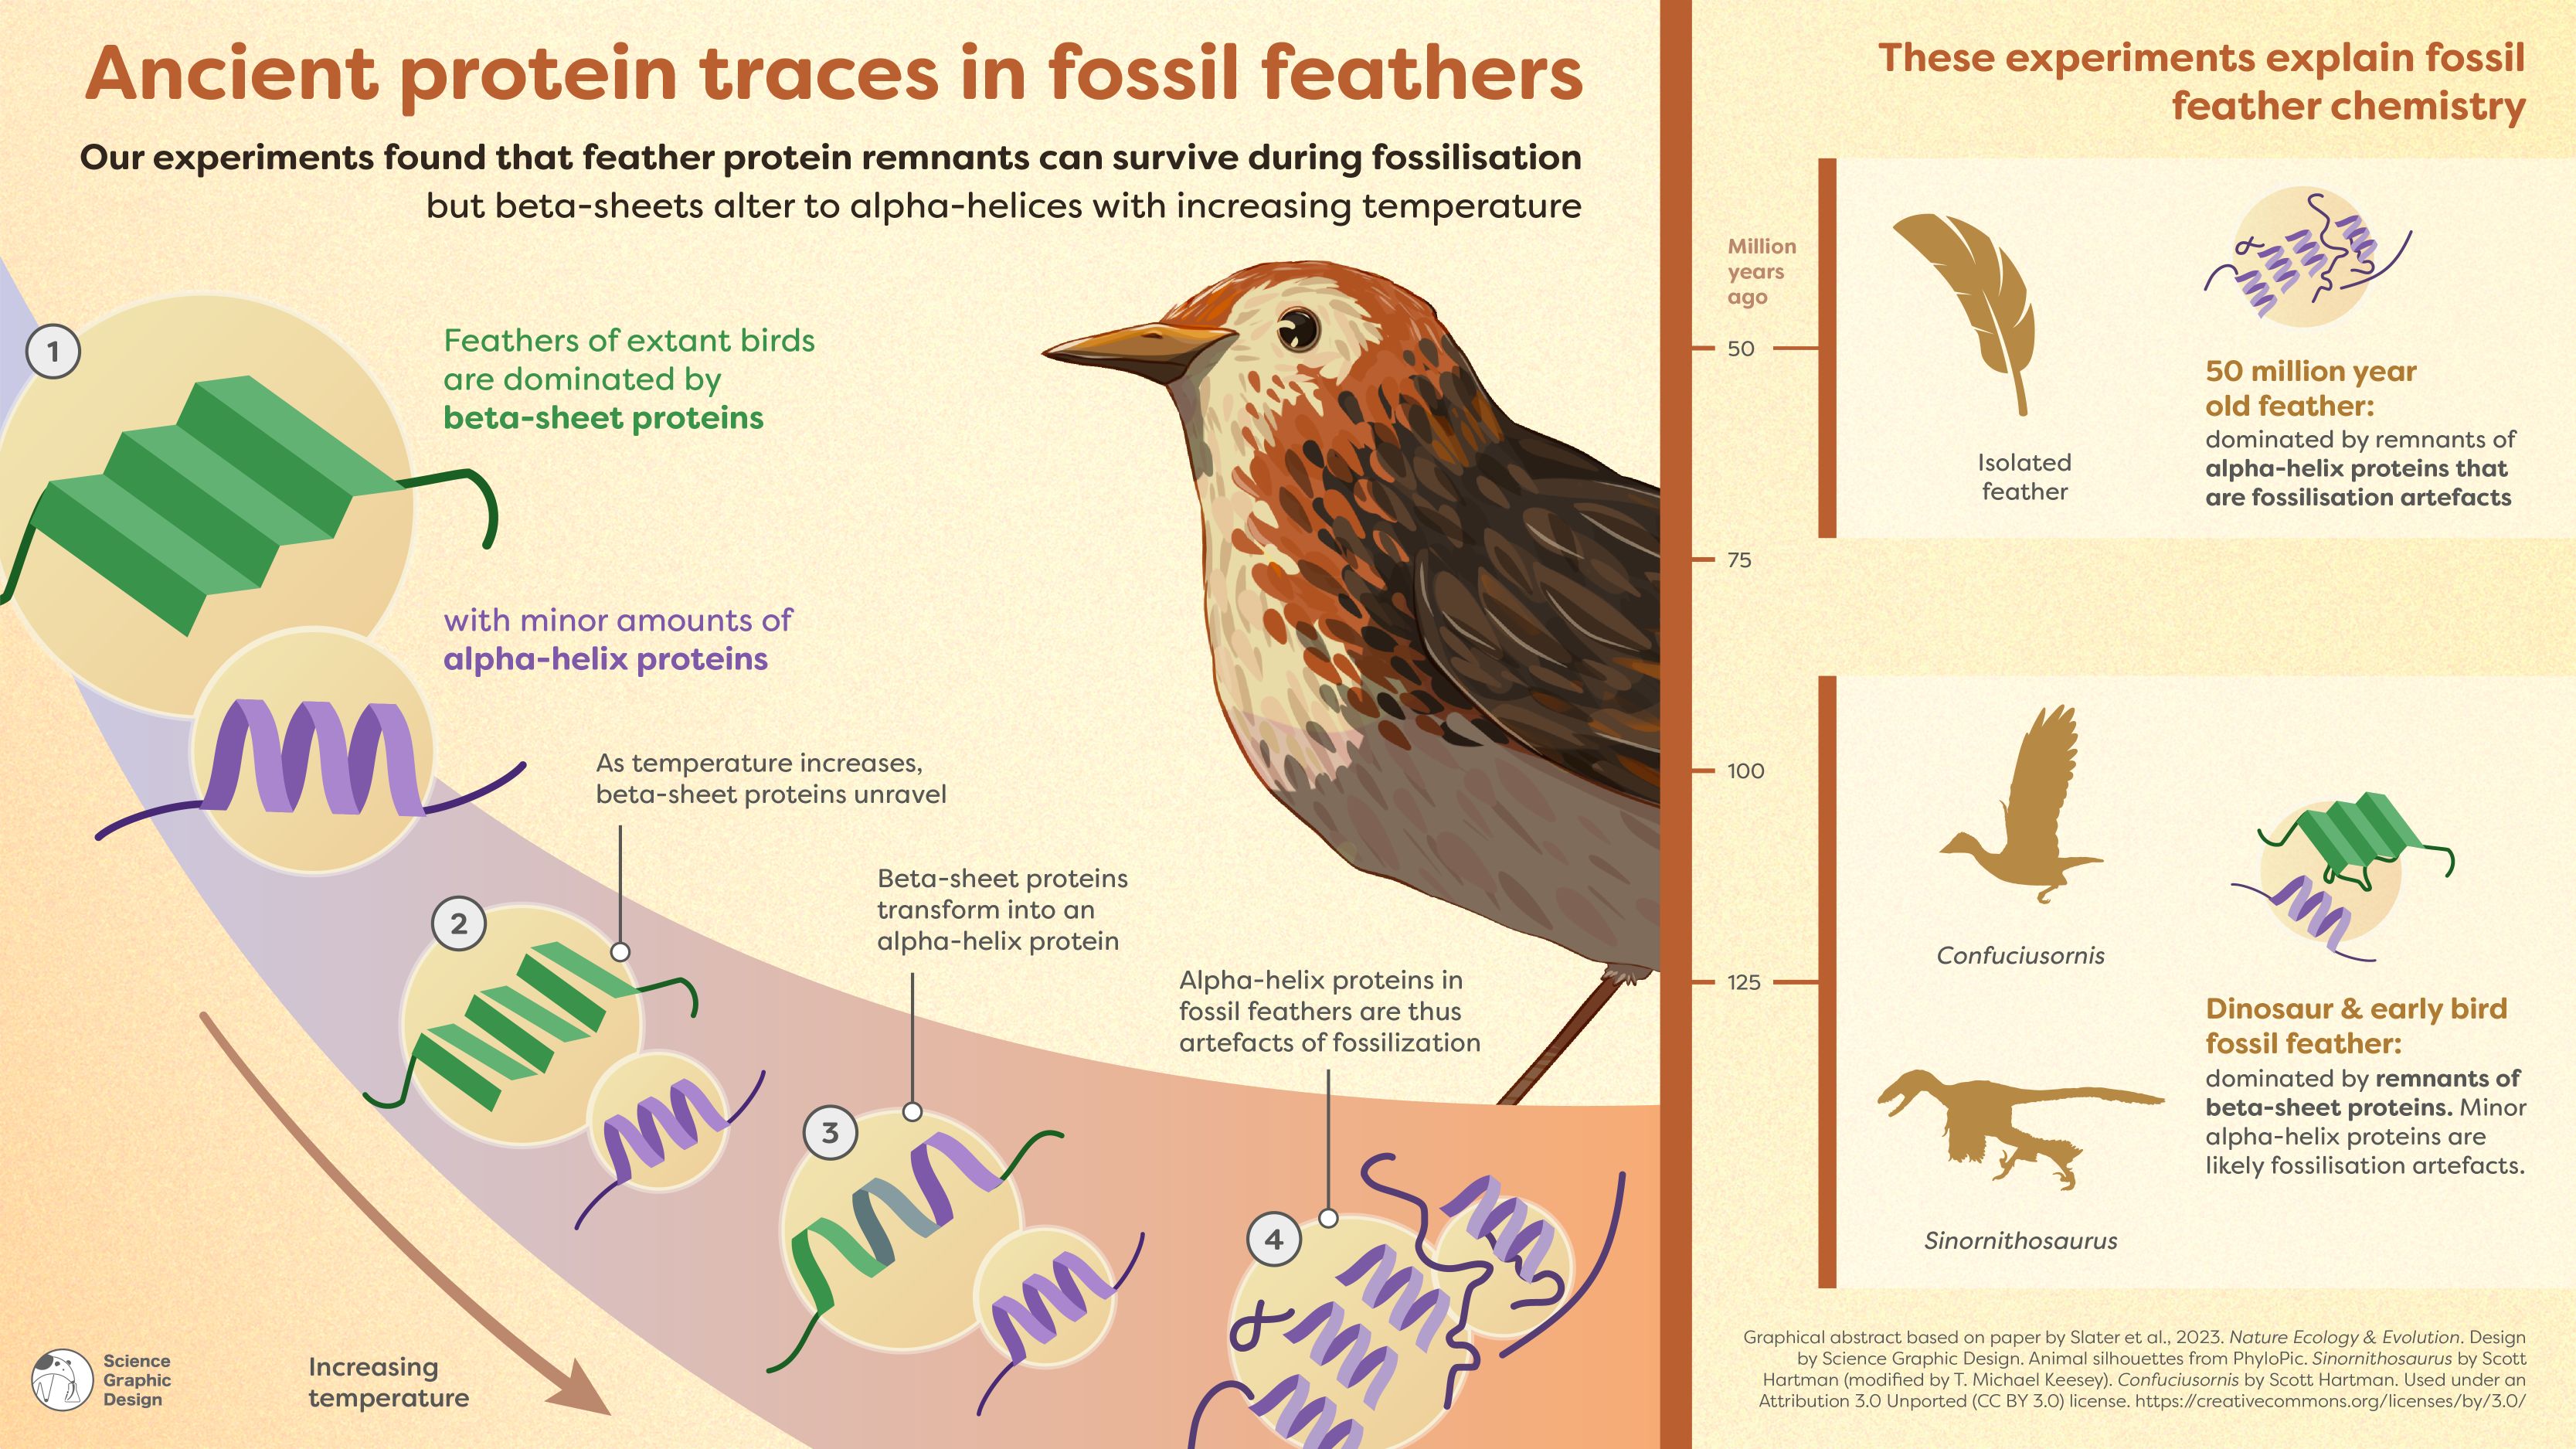 Tiffany has new paper on fossil feather proteins in Nature Ecology and Evolution